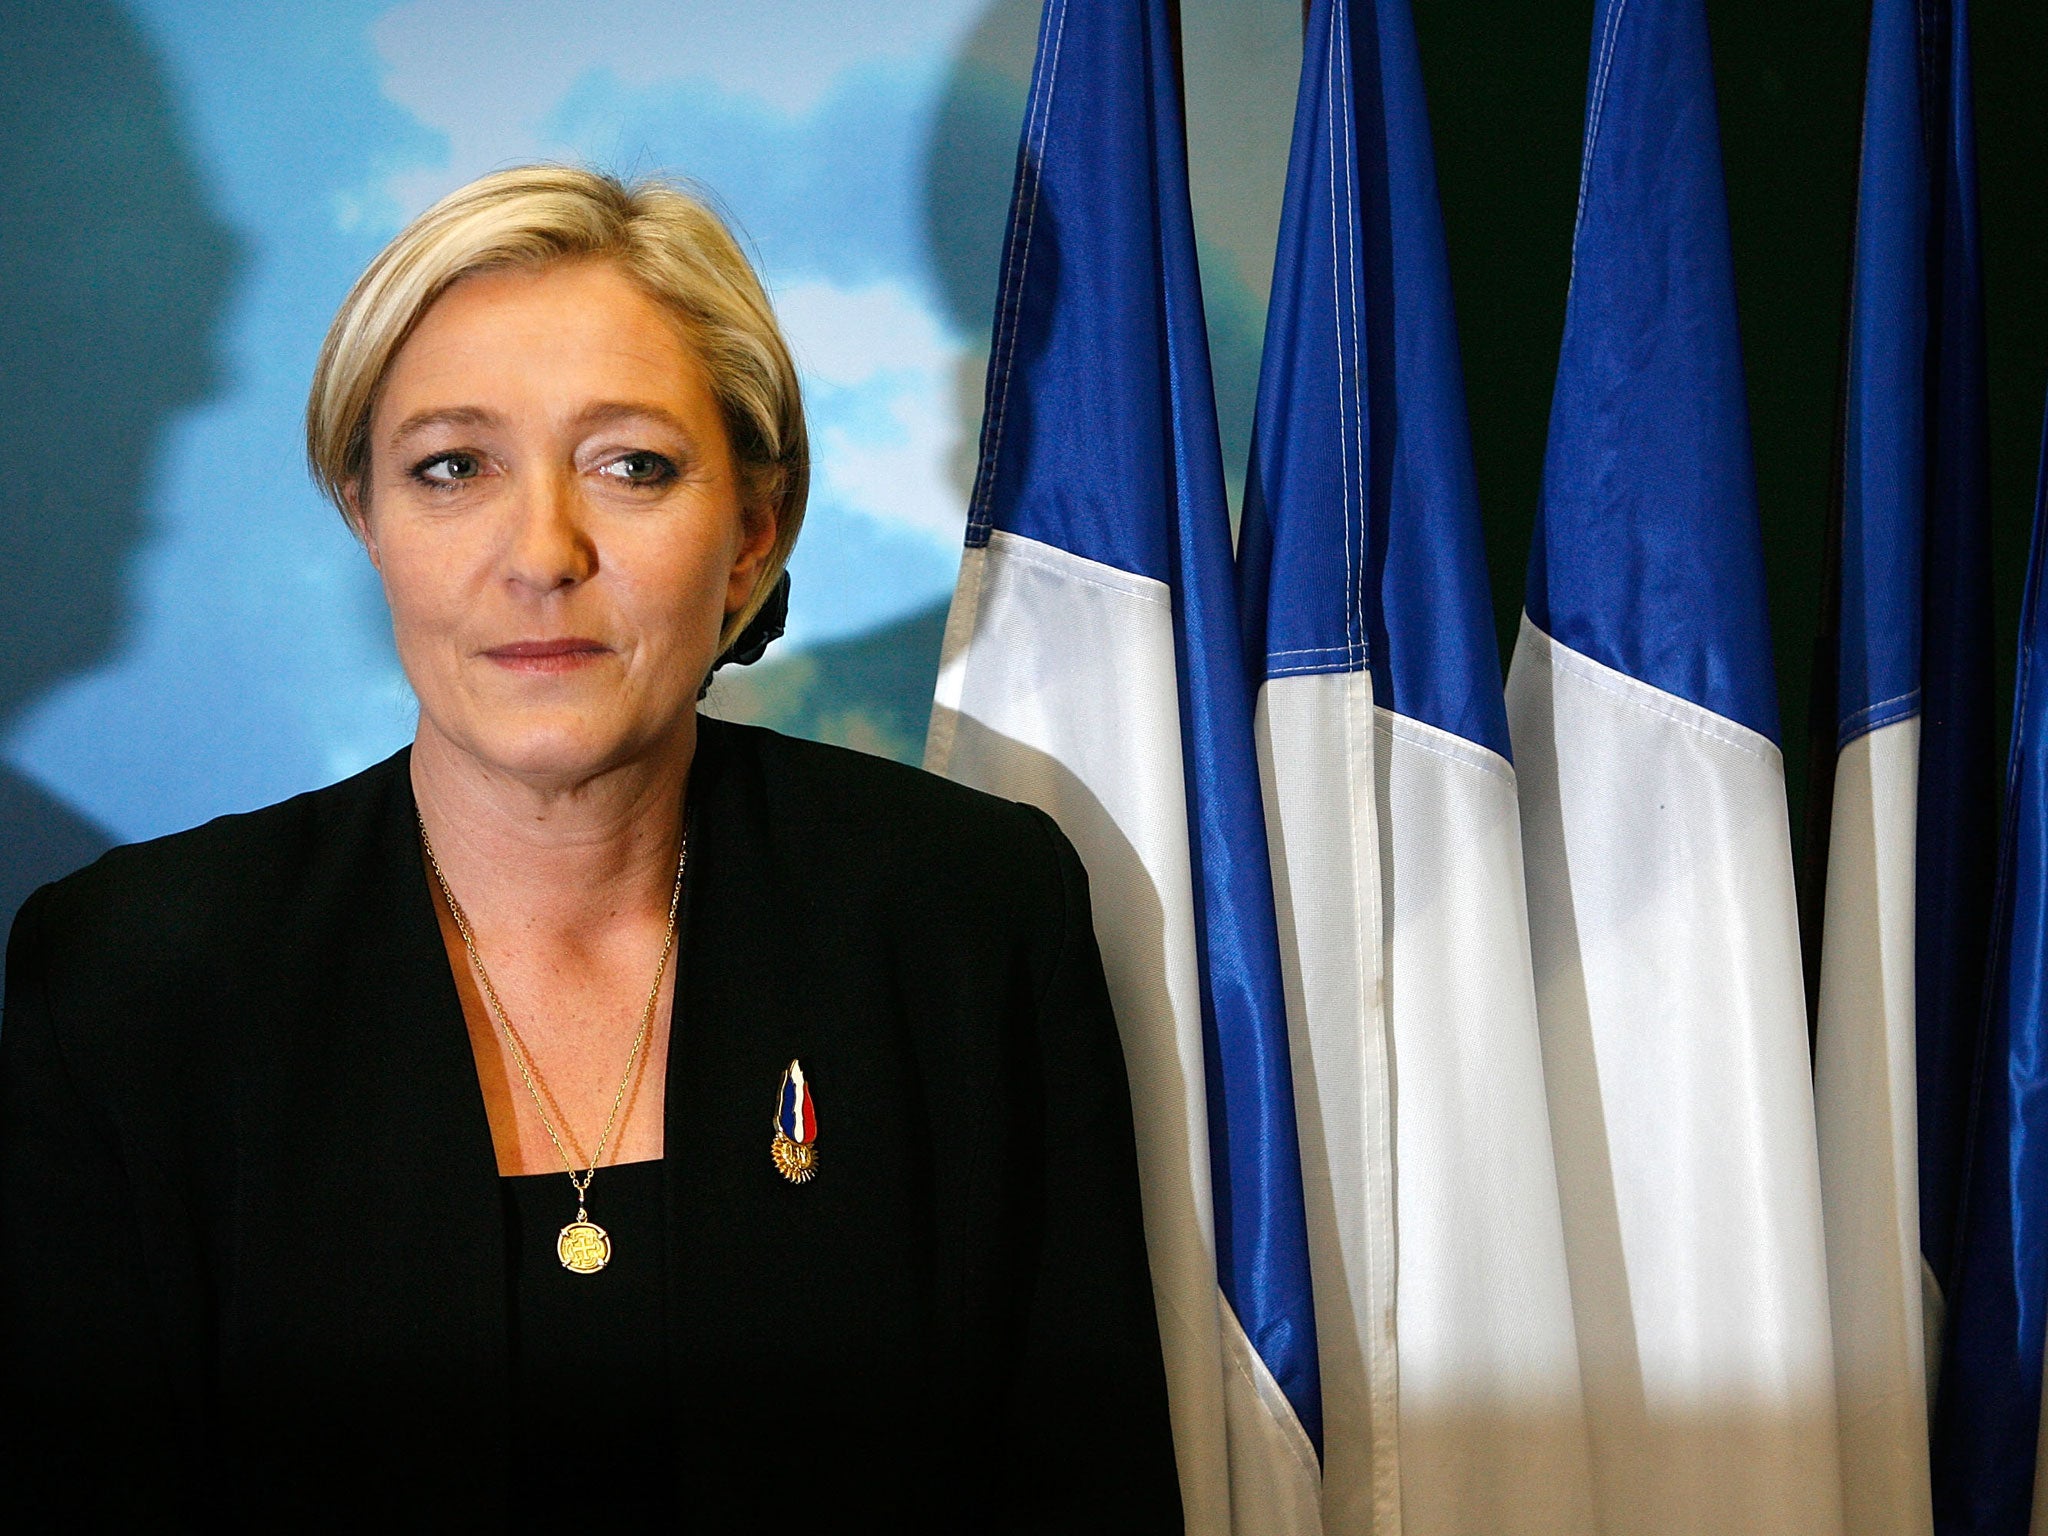 Marine Le Pen had her driving license revoked in 2012